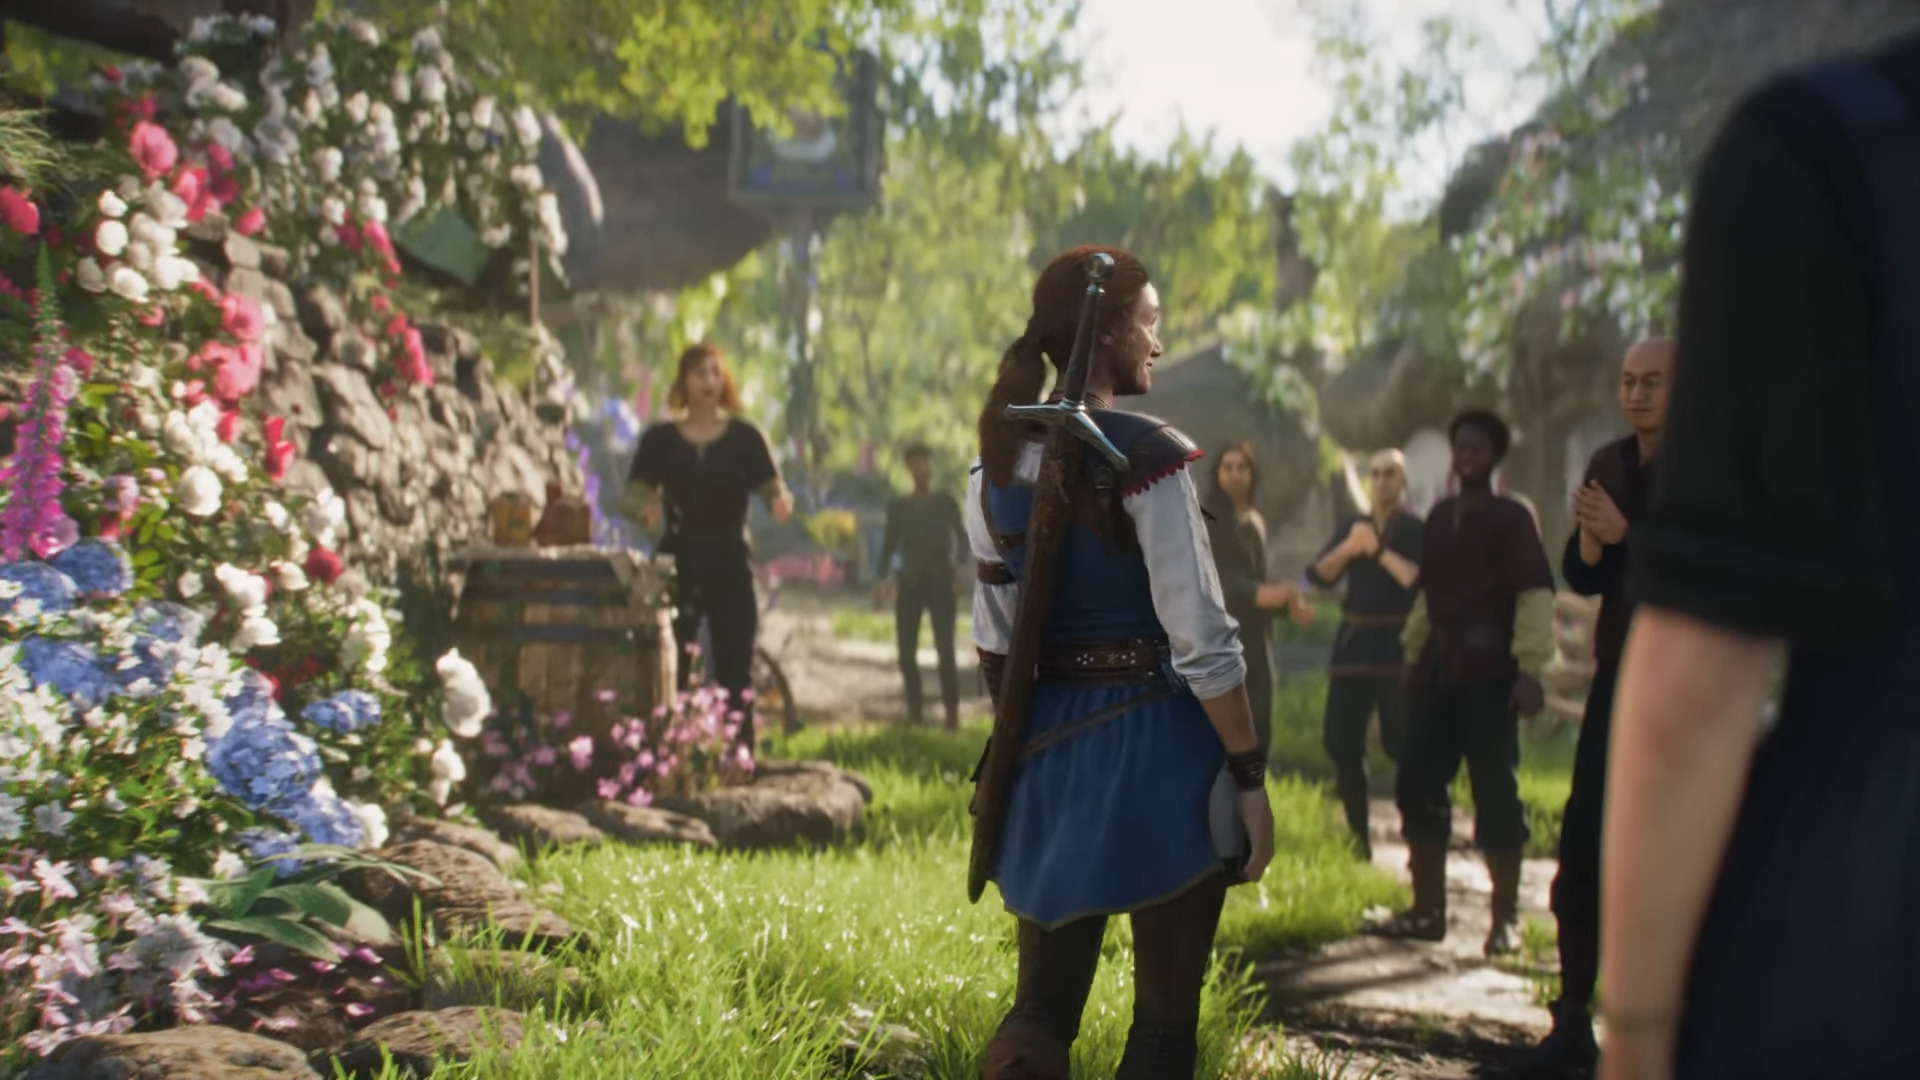 Fable reboot gets comedic trailer involving heroes and giants TechRadar